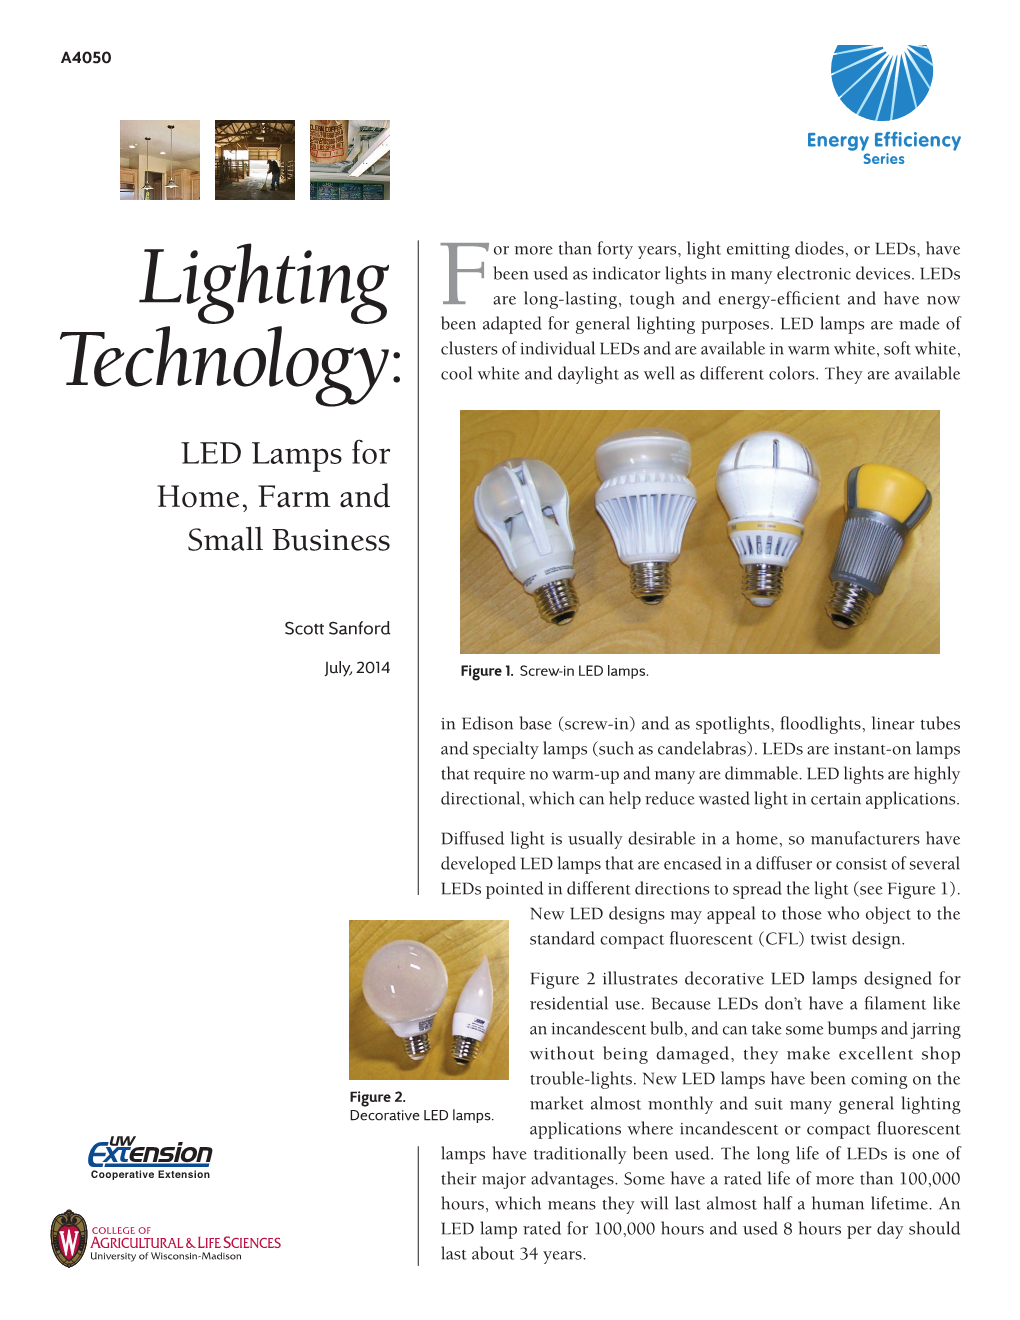 Lighting Technology: LED Lamps for Home, Farm and Small Business Energy Efficiency Series